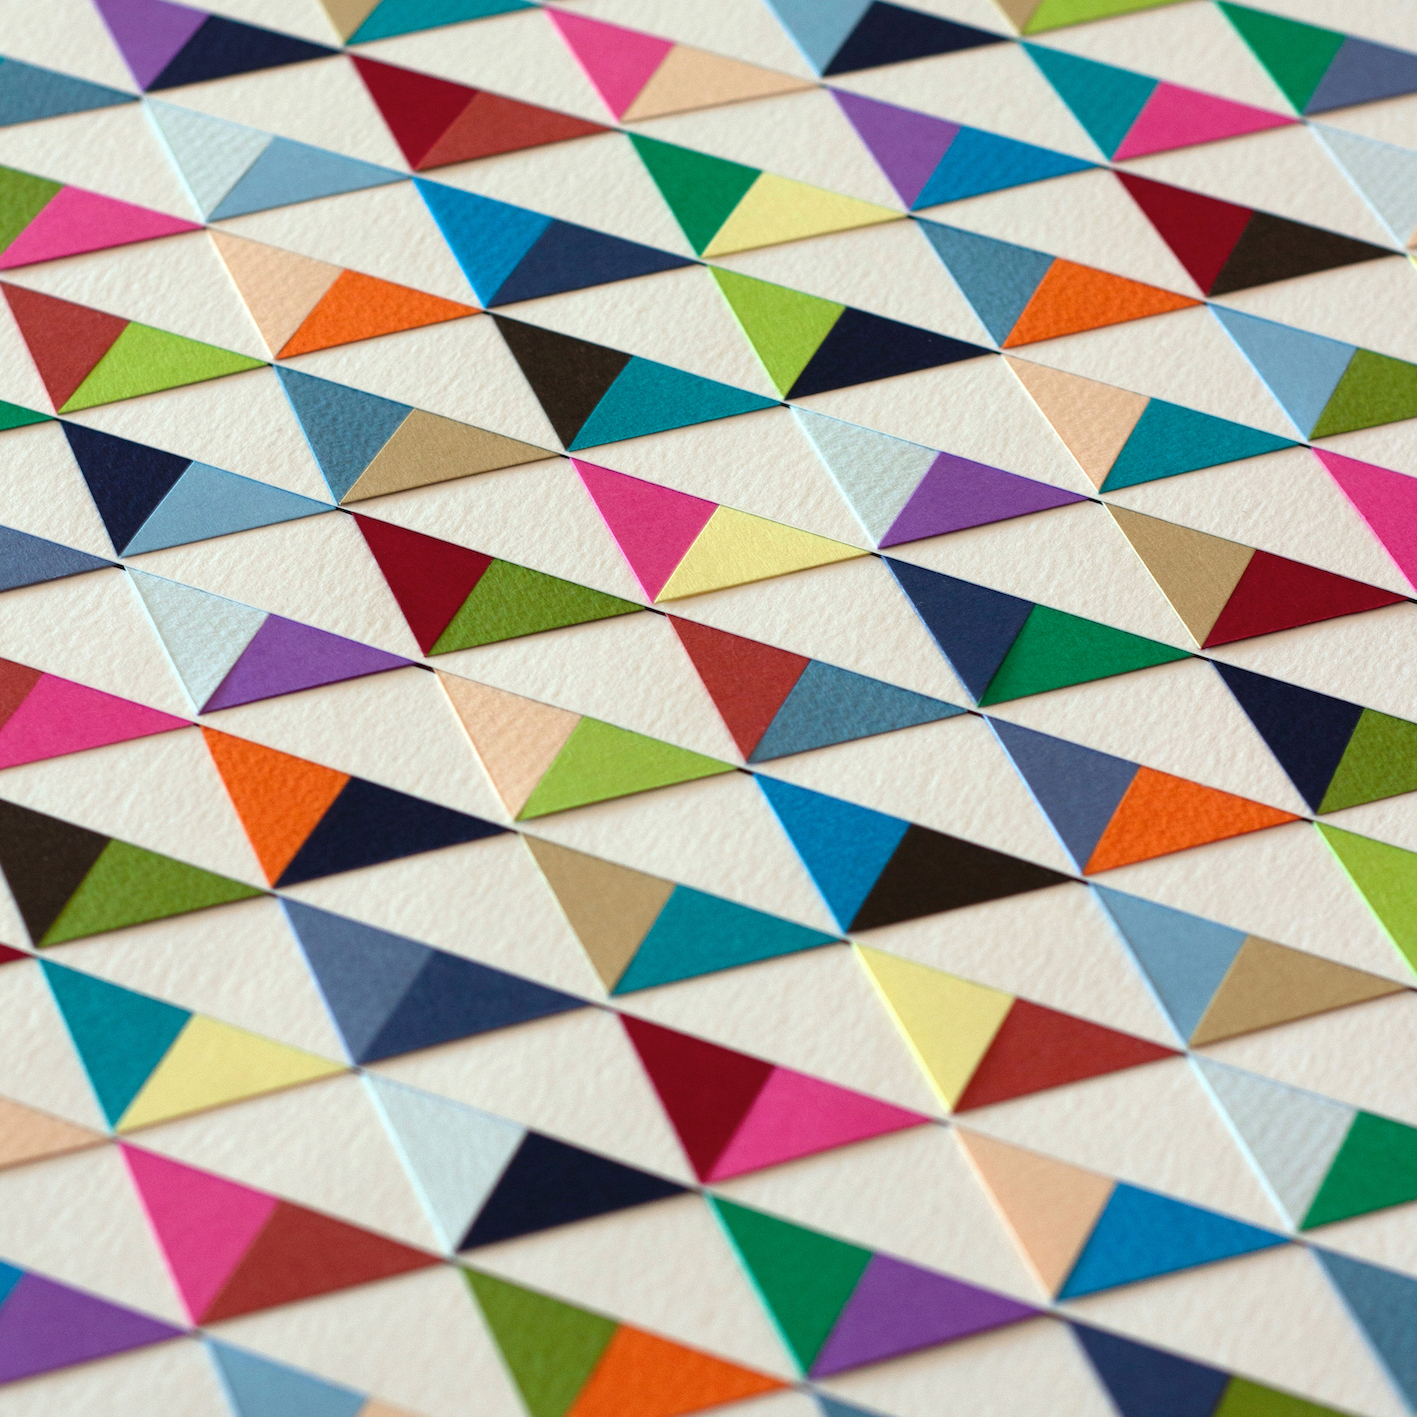 image of paper artwork featuring multicolored triangular shapes